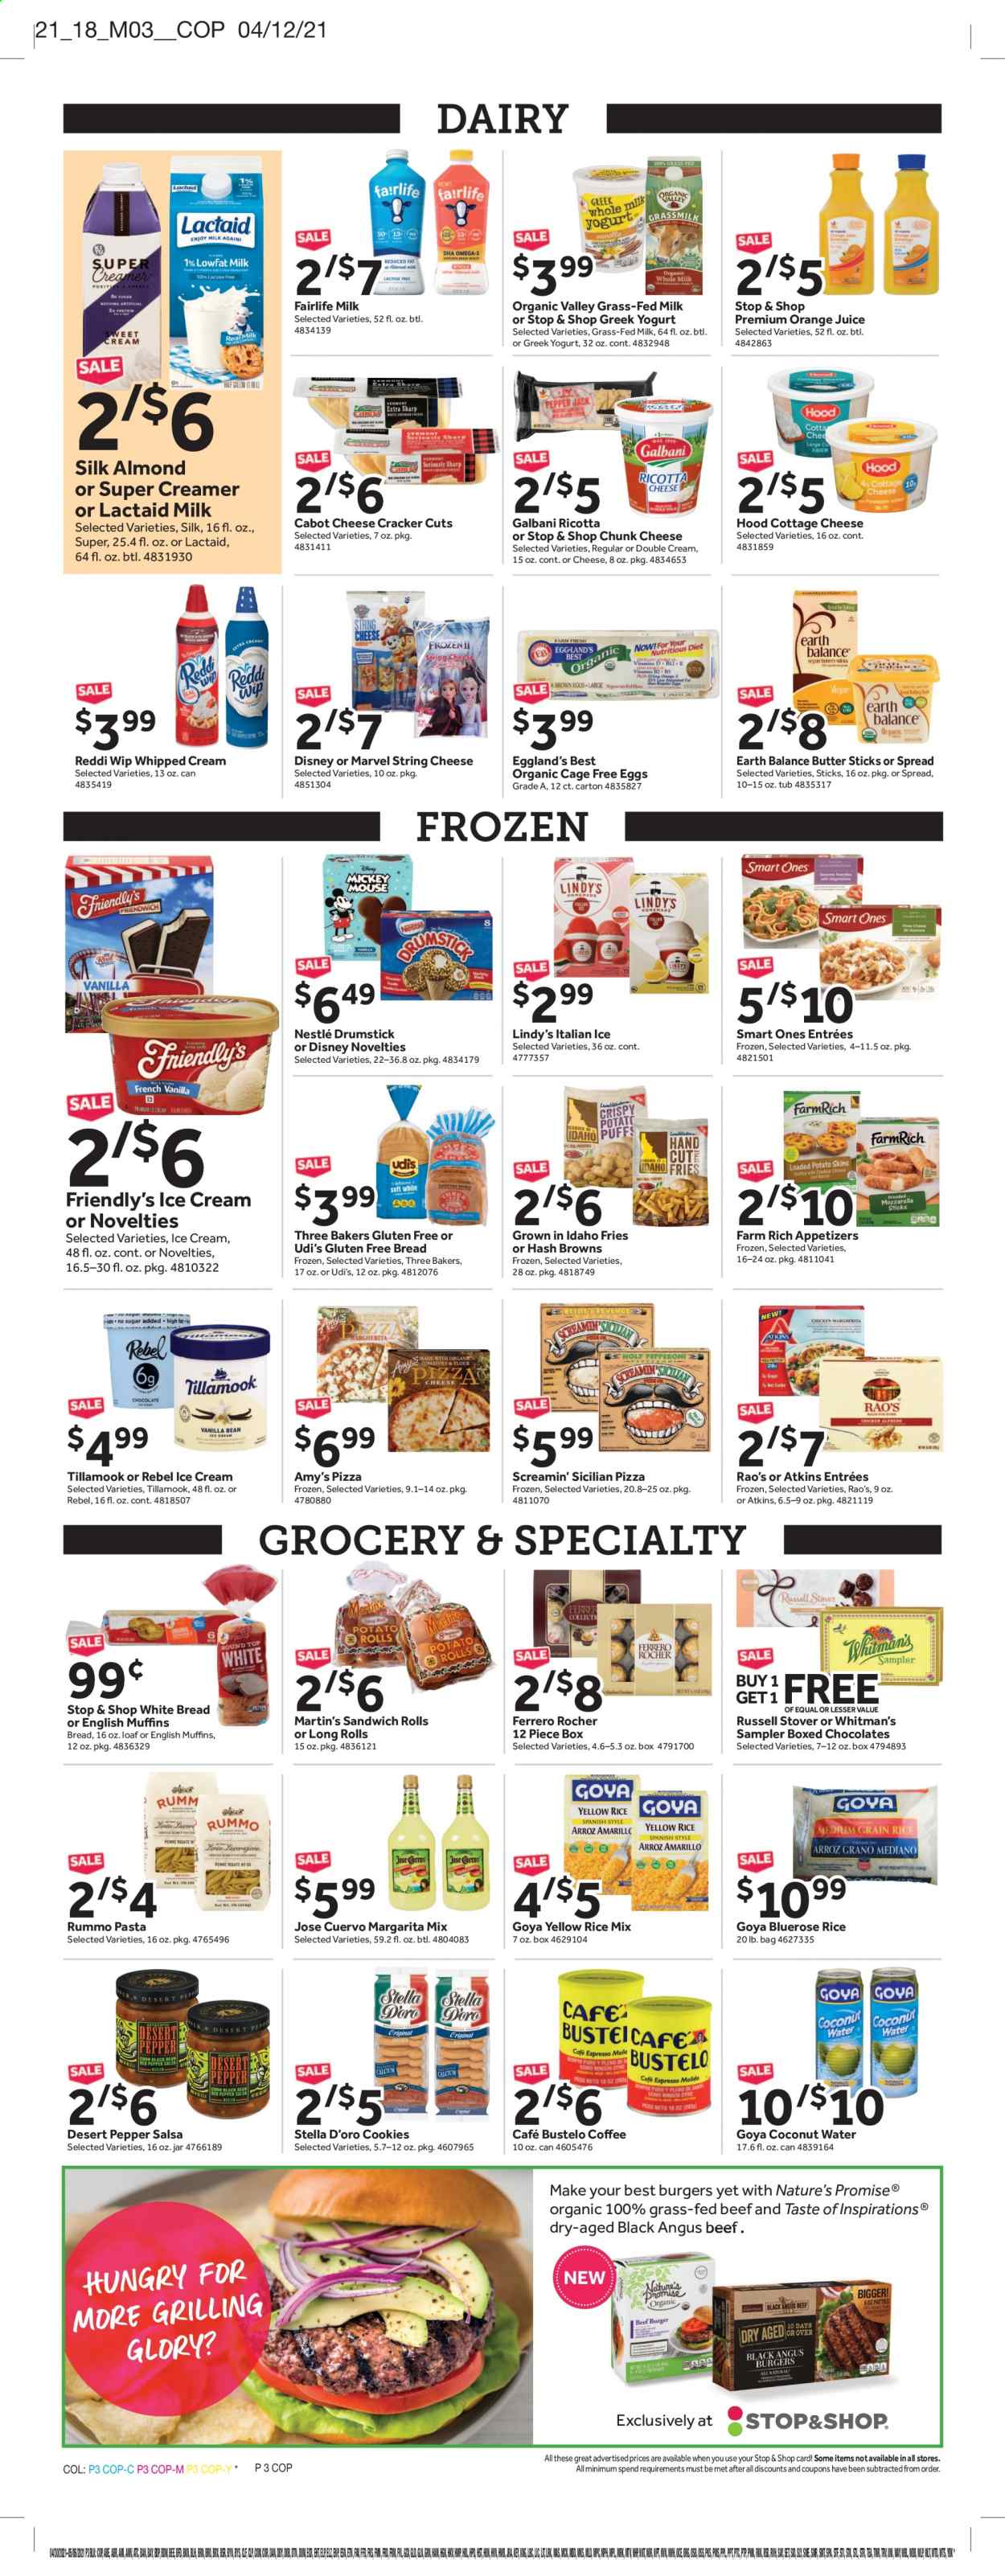 thumbnail - Stop & Shop Flyer - 04/30/2021 - 05/06/2021 - Sales products - white bread, Nature’s Promise, sandwich rolls, beef meat, hamburger, pizza, pasta, ham, cottage cheese, Lactaid, ricotta, string cheese, Galbani, chunk cheese, greek yoghurt, yoghurt, milk, eggs, cage free eggs, butter, whipped cream, creamer, ice cream, Friendly's Ice Cream, hash browns, potato fries, Screamin' Sicilian, cookies, Nestlé, chocolate, Ferrero Rocher, crackers, Goya, pepper, salsa, orange juice, juice, coconut water, Margarita Mix, tea, Disney, Bakers. Page 5.